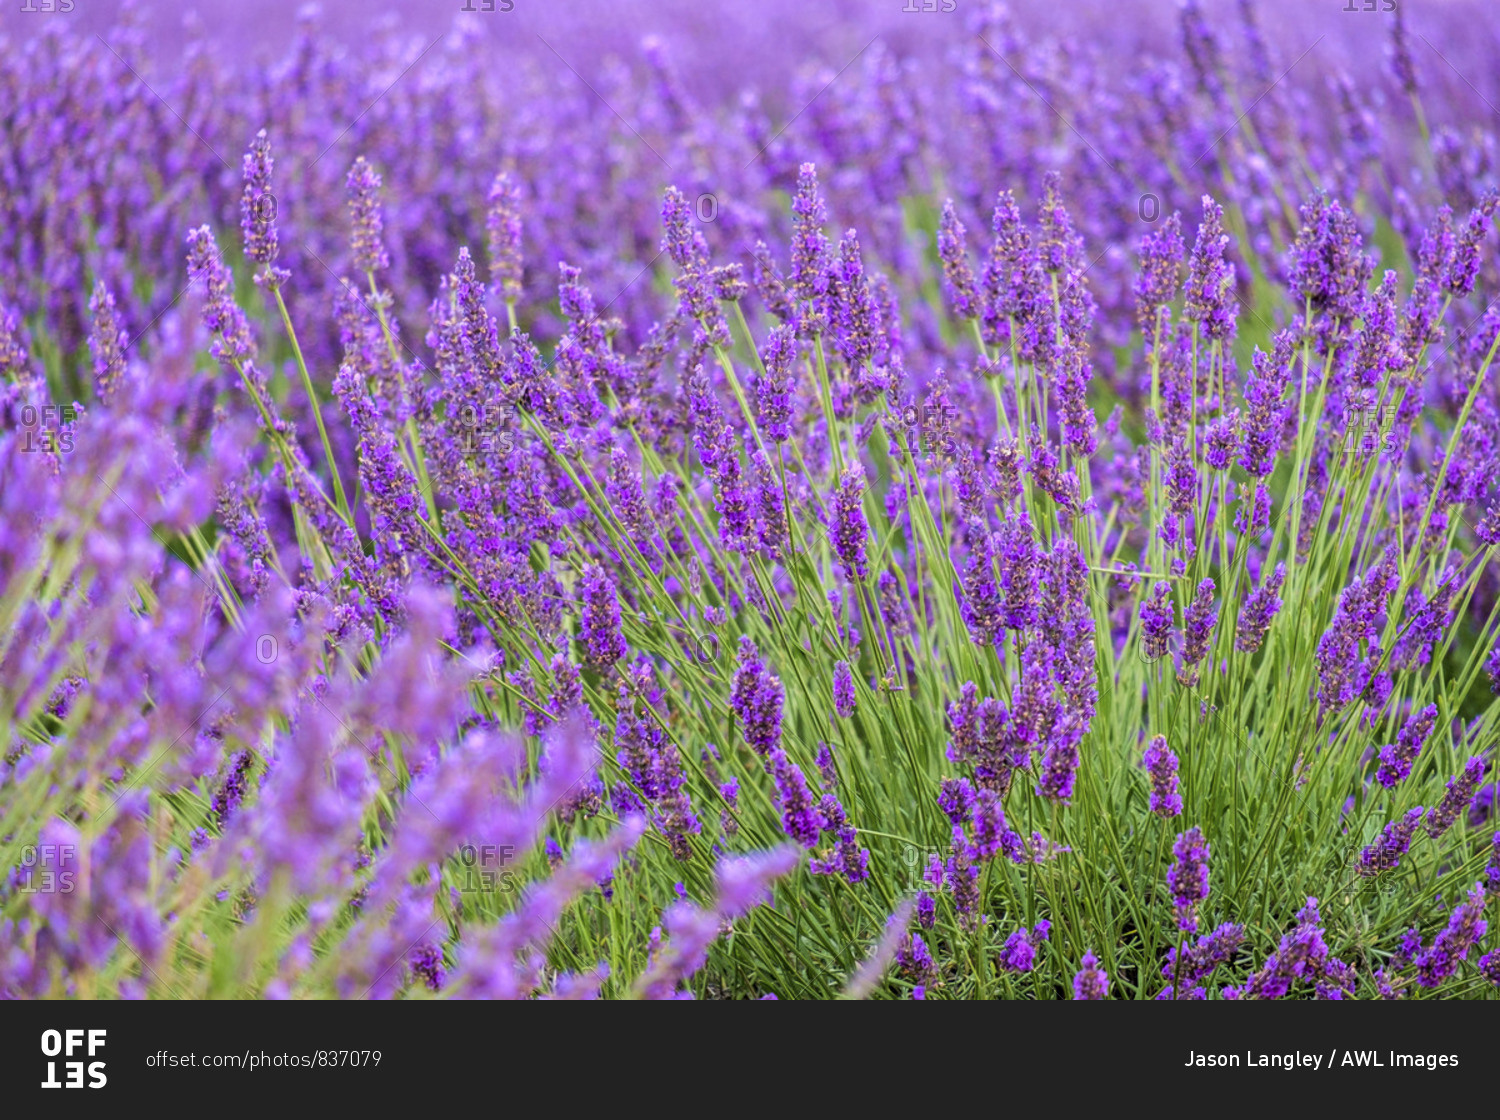 Lavender blossoms in height of bloom in early July, Plateau de Valensole, near Puimoisson, Provence-Alpes-Cote d'Azur, France